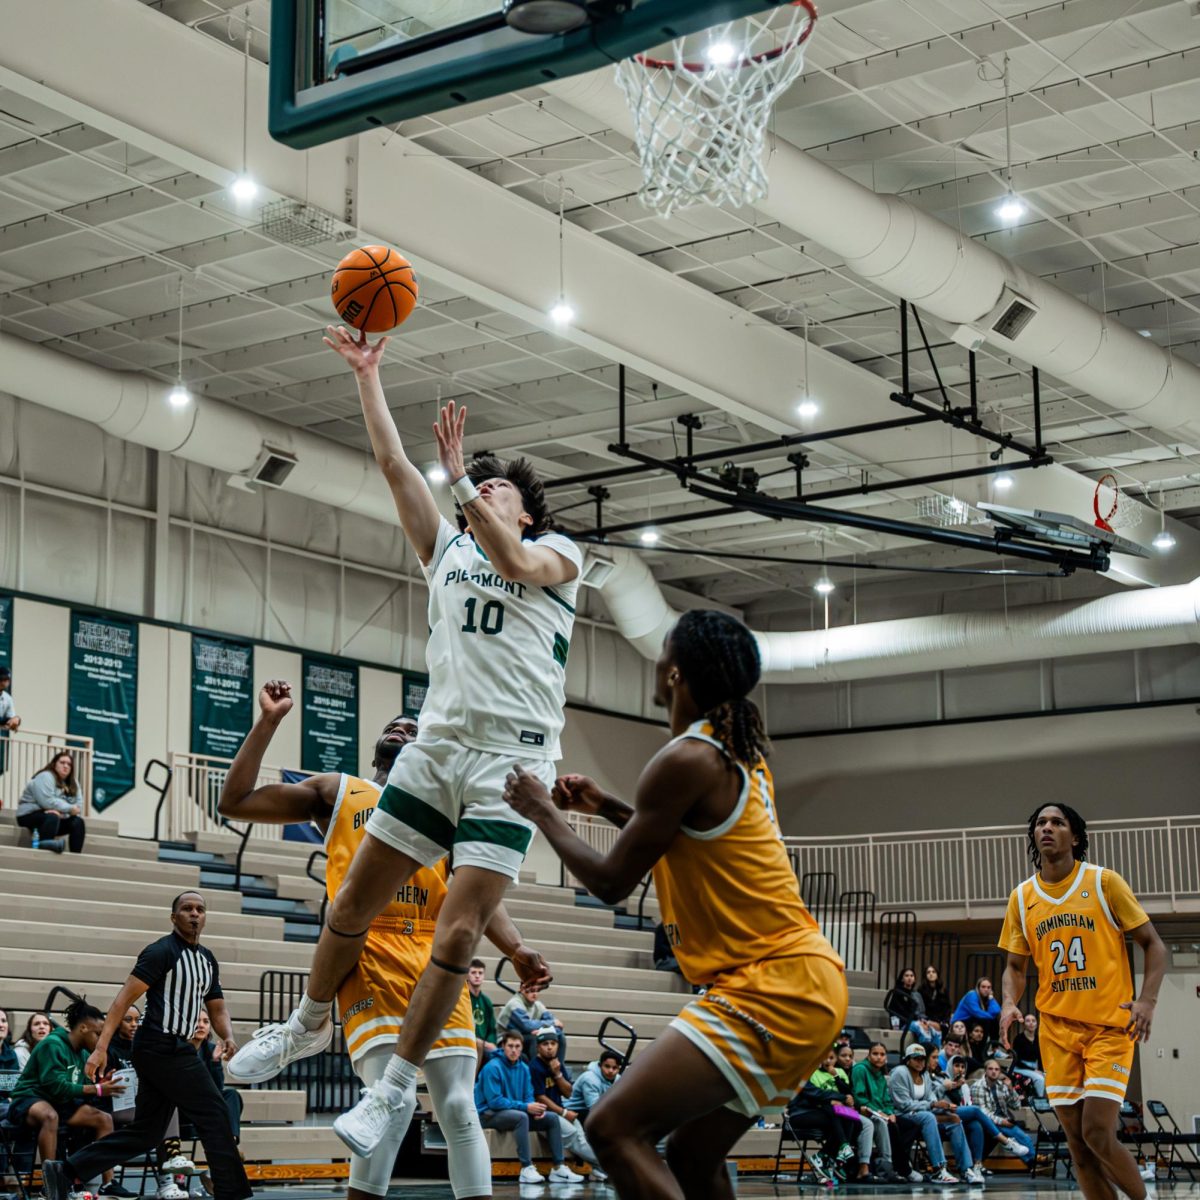 Bailey Wiseman goes up for the layup against Birmingham-Southern. The junior guard proved critical in his return from injury, scoring 16 points in the Lions 91-93 overtime victory.